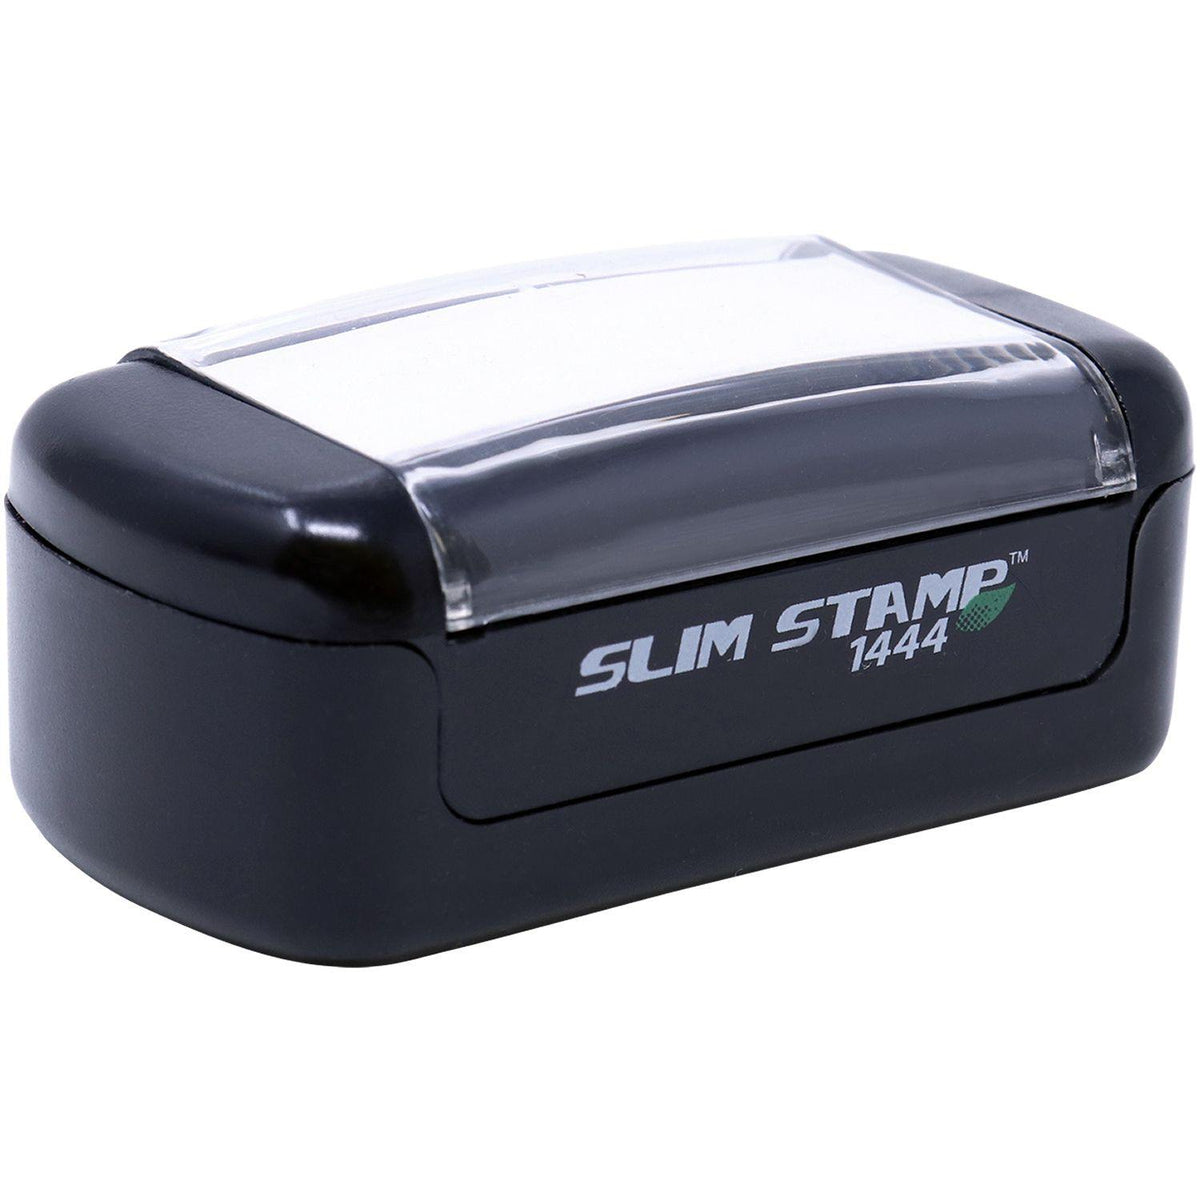 Alt View of Slim Pre-Inked Importante Stamp Mount Angle